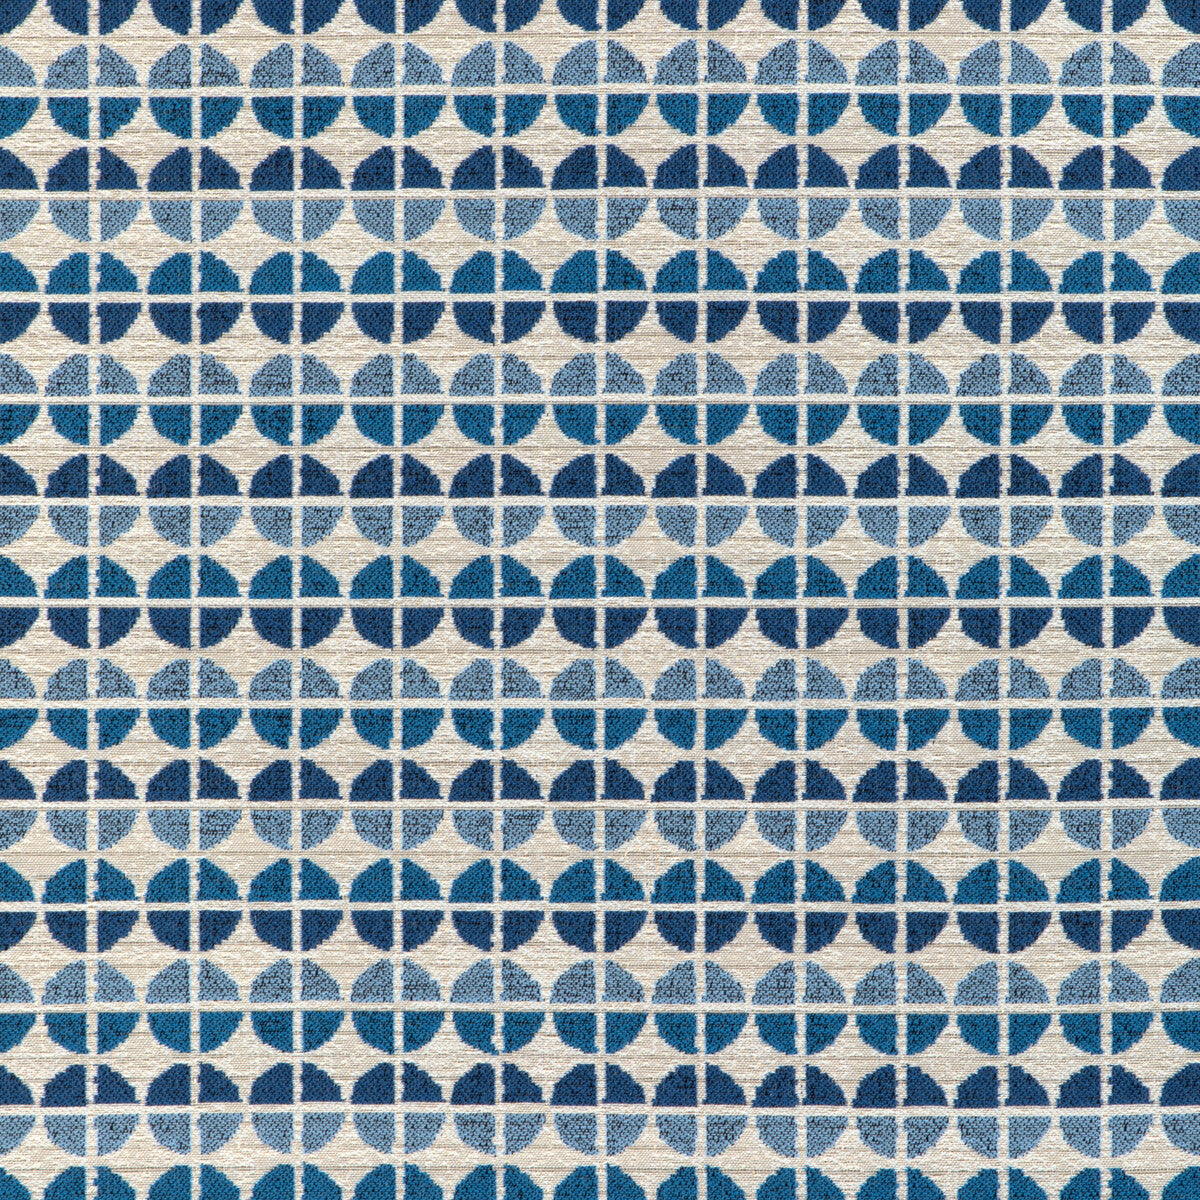 Decoy fabric in coastal color - pattern 37051.516.0 - by Kravet Contract in the Chesapeake collection